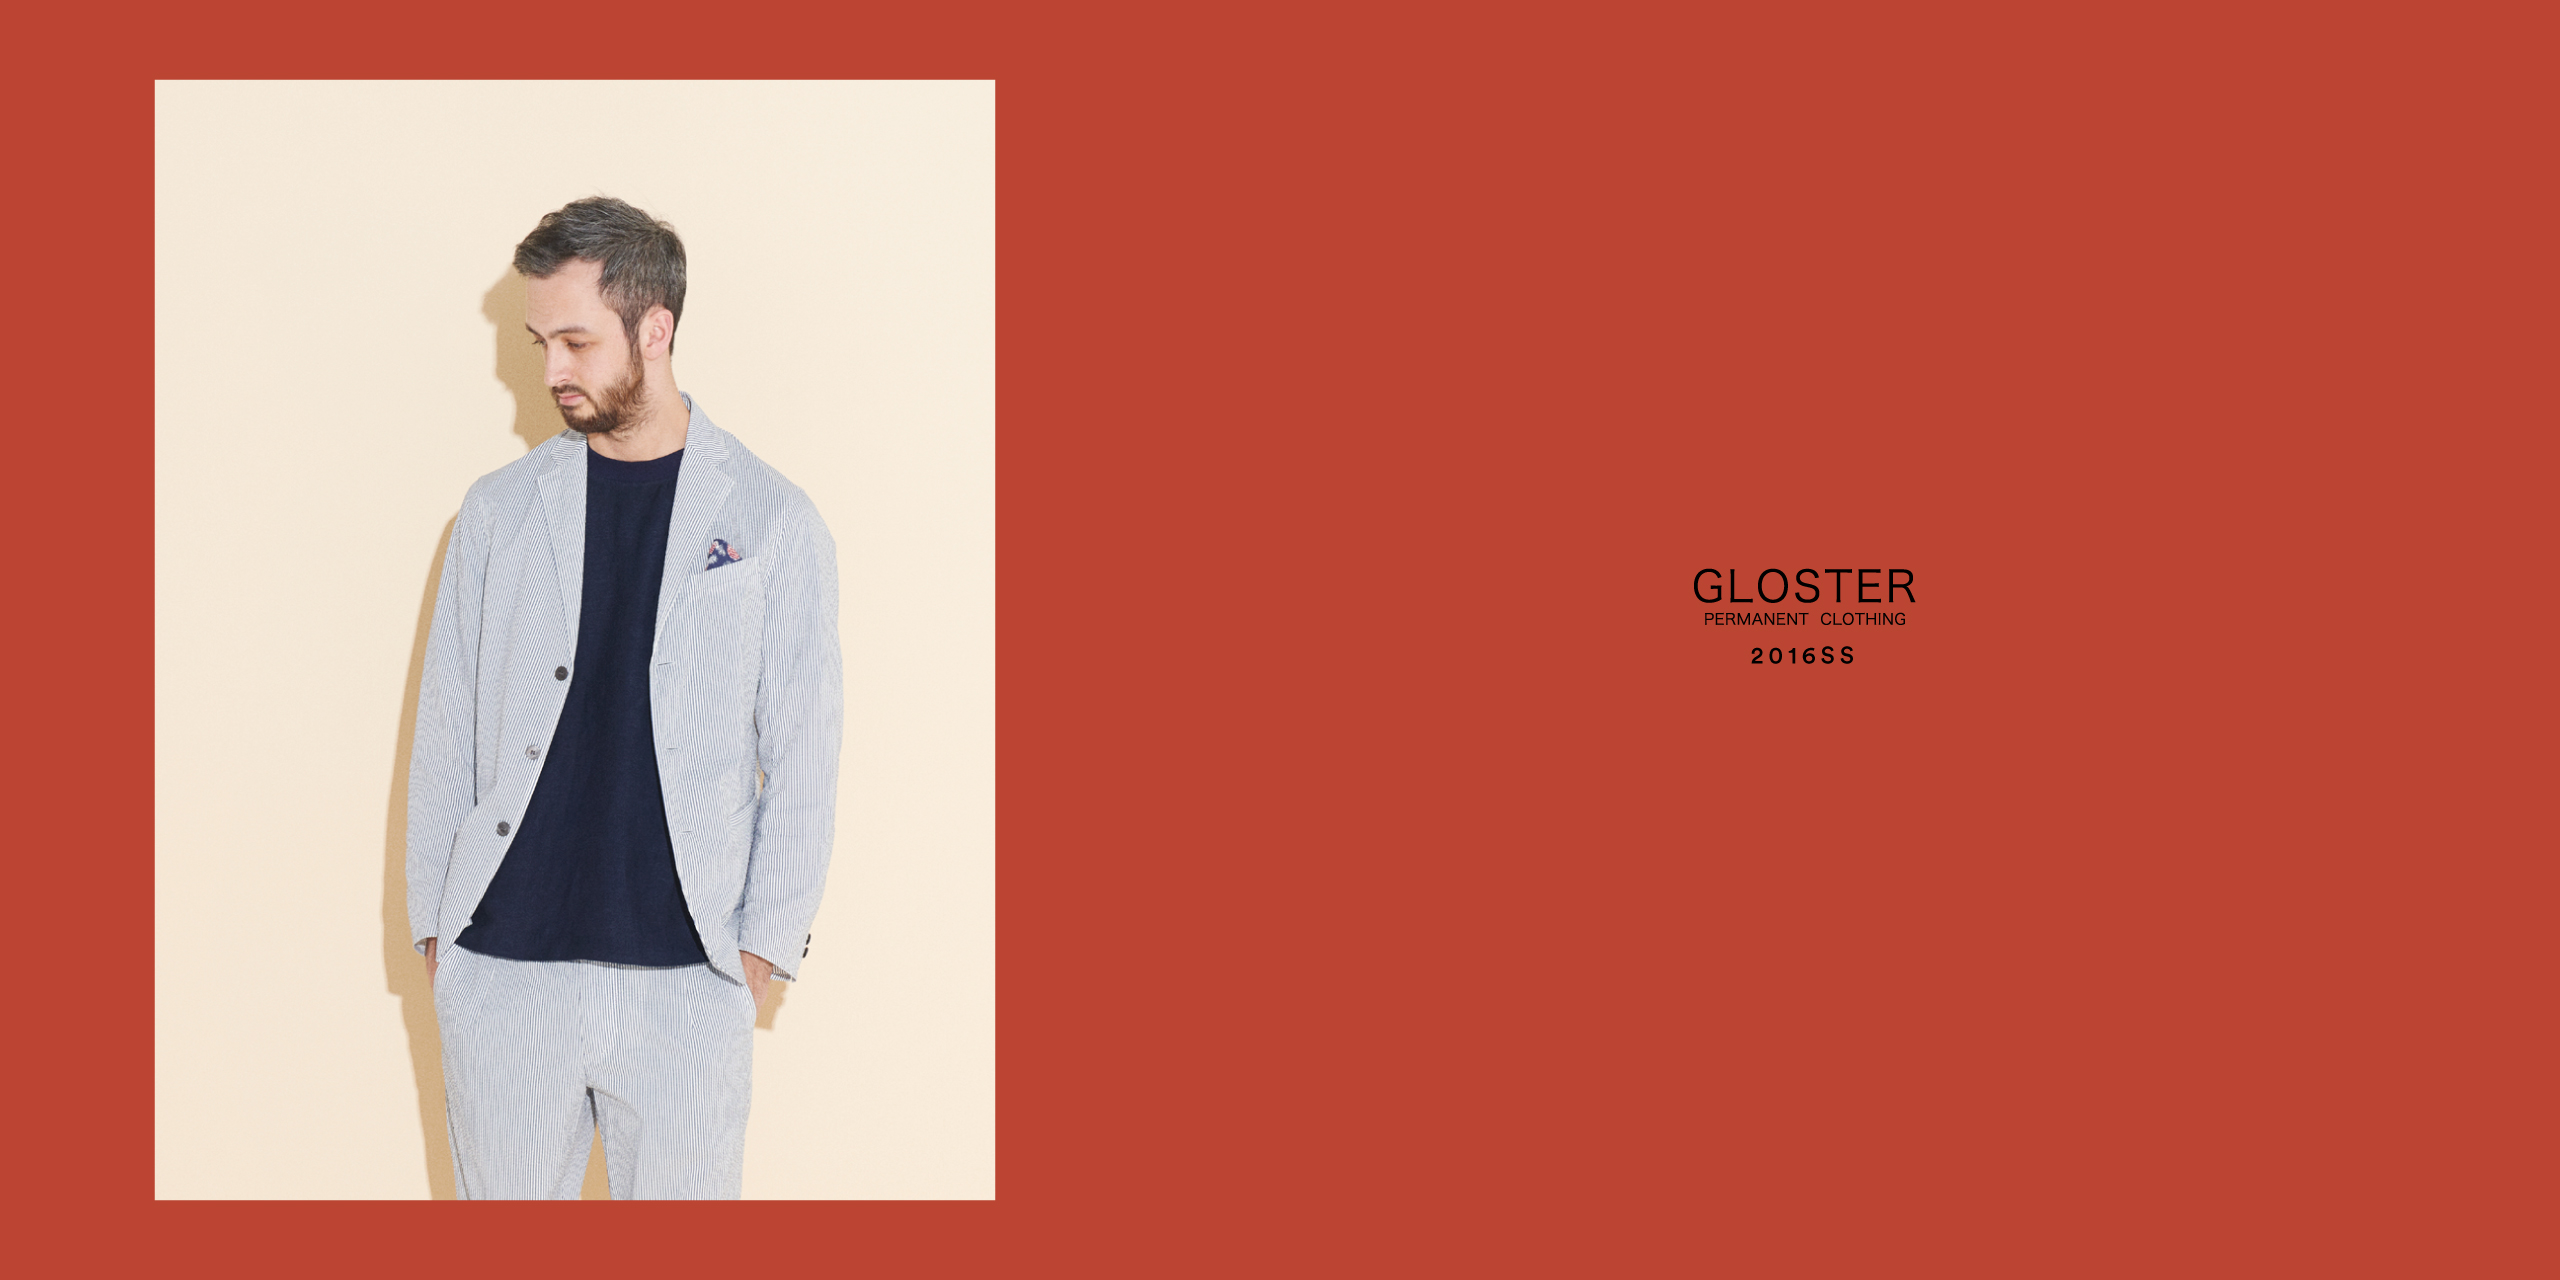 GLOSTER PERMANENT CLOTHING